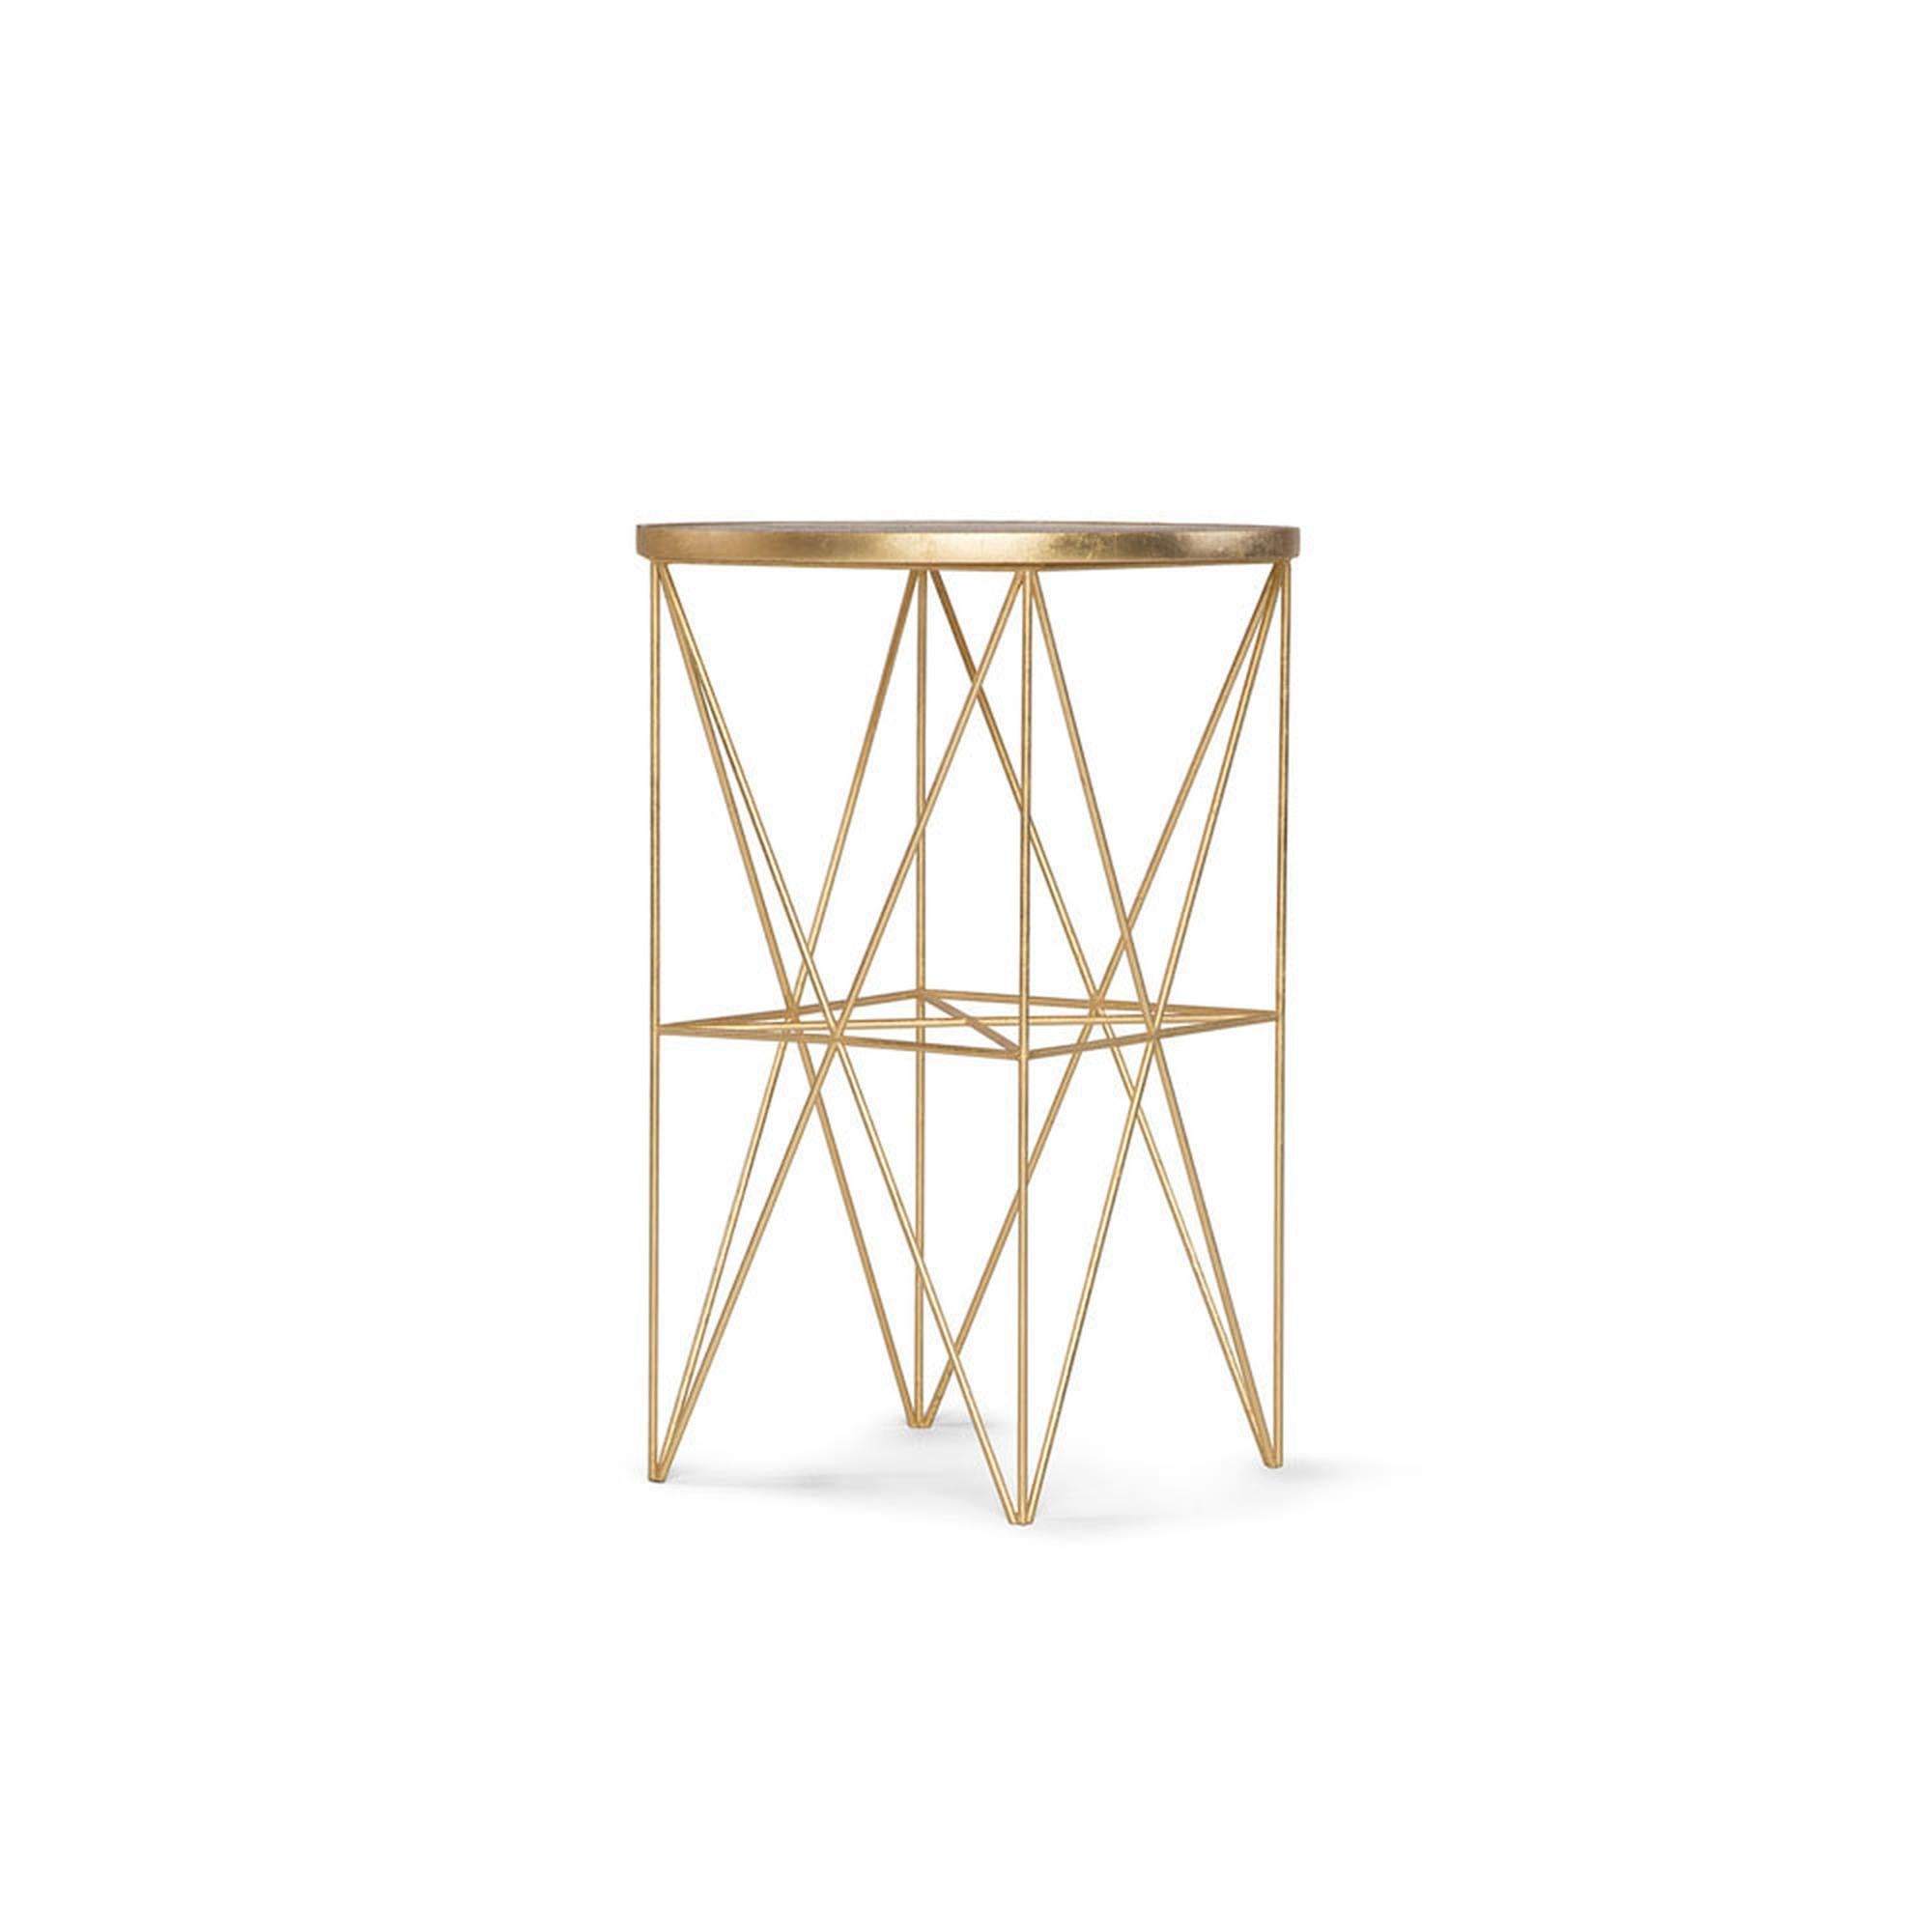 This handmade Monterey tall side table features an intricate hand-gilded metal base and a hand- nished wood top. Elegant and functional, this side table uni es style and aesthetic by adding a touch of Old Hollywood glitz on a hand-gilded geometric